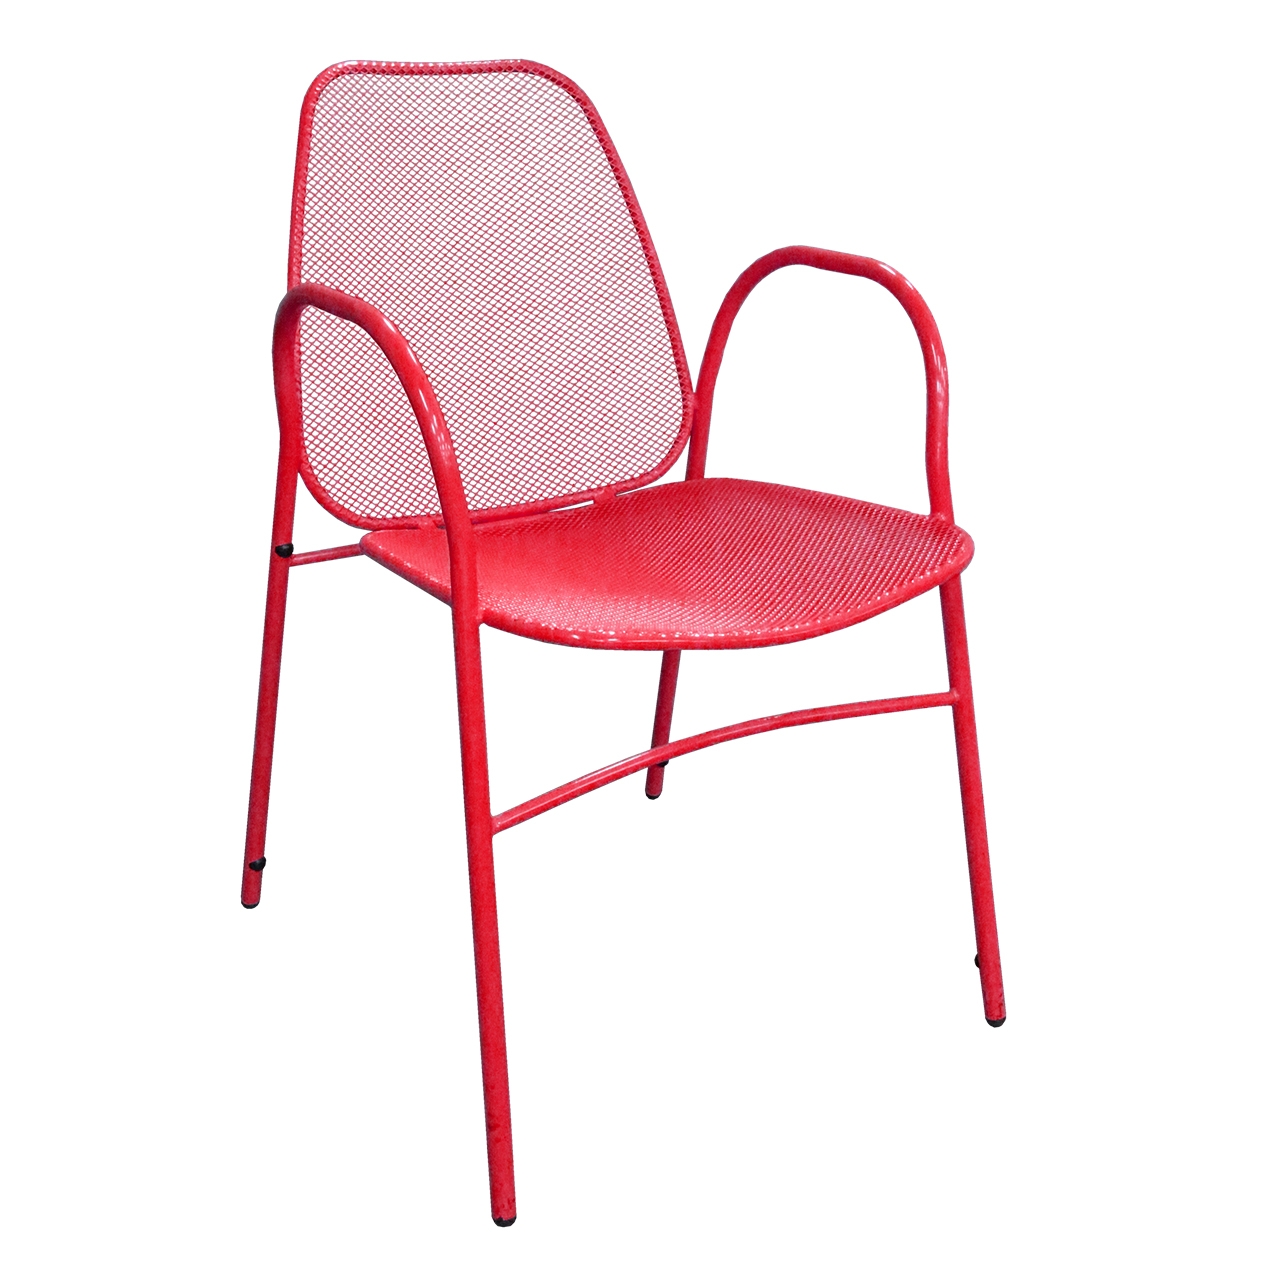 ATS Furniture 96-R Aluminum Outdoor Arm Chair with Meshed Back & Seat